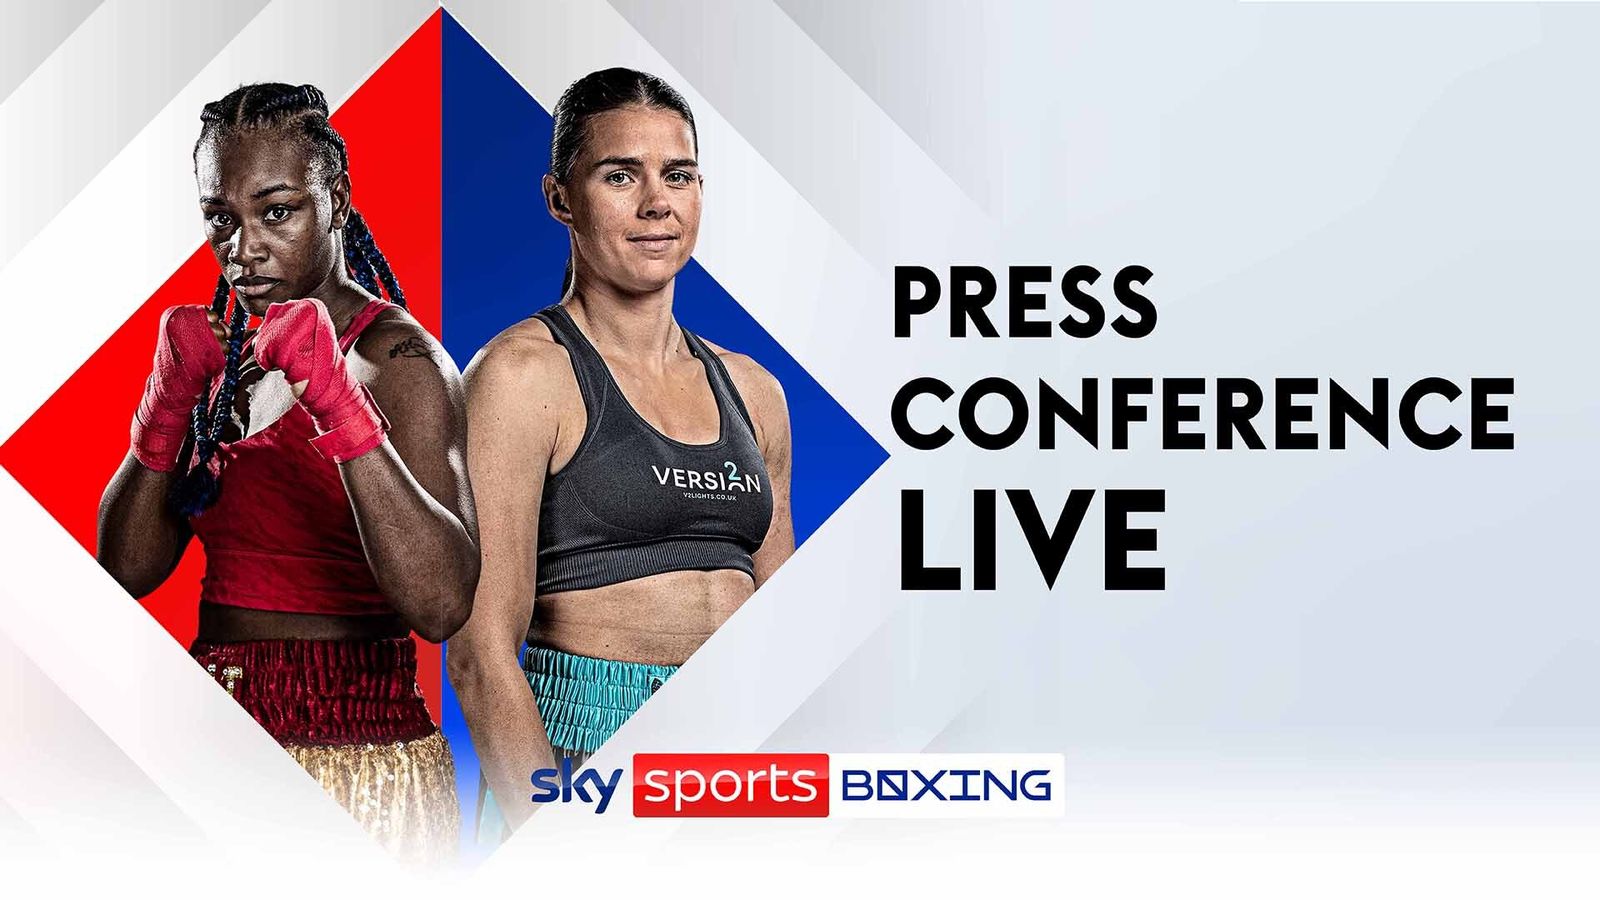 Shields vs Marshall Watch a live stream of final press conference for undisputed world title fight Boxing News Sky Sports